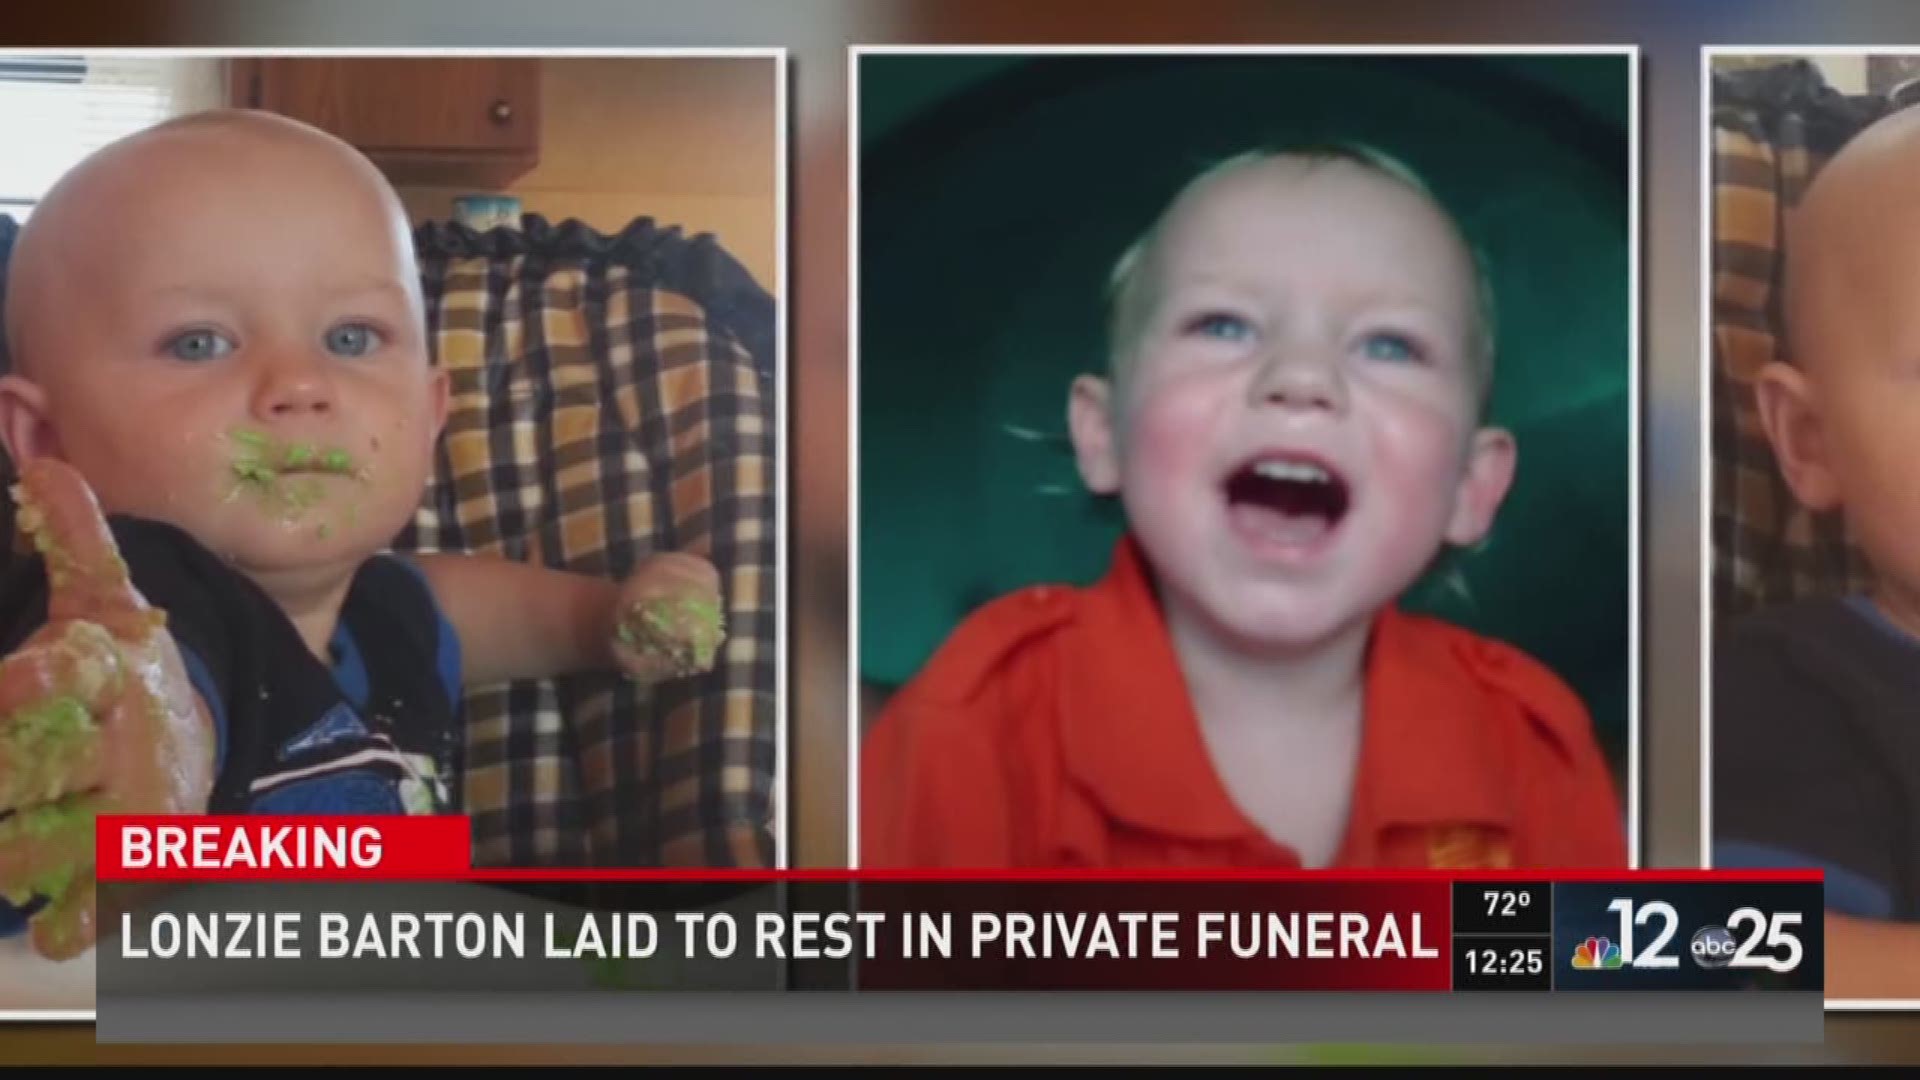 Lonzie Barton laid to rest in private funeral